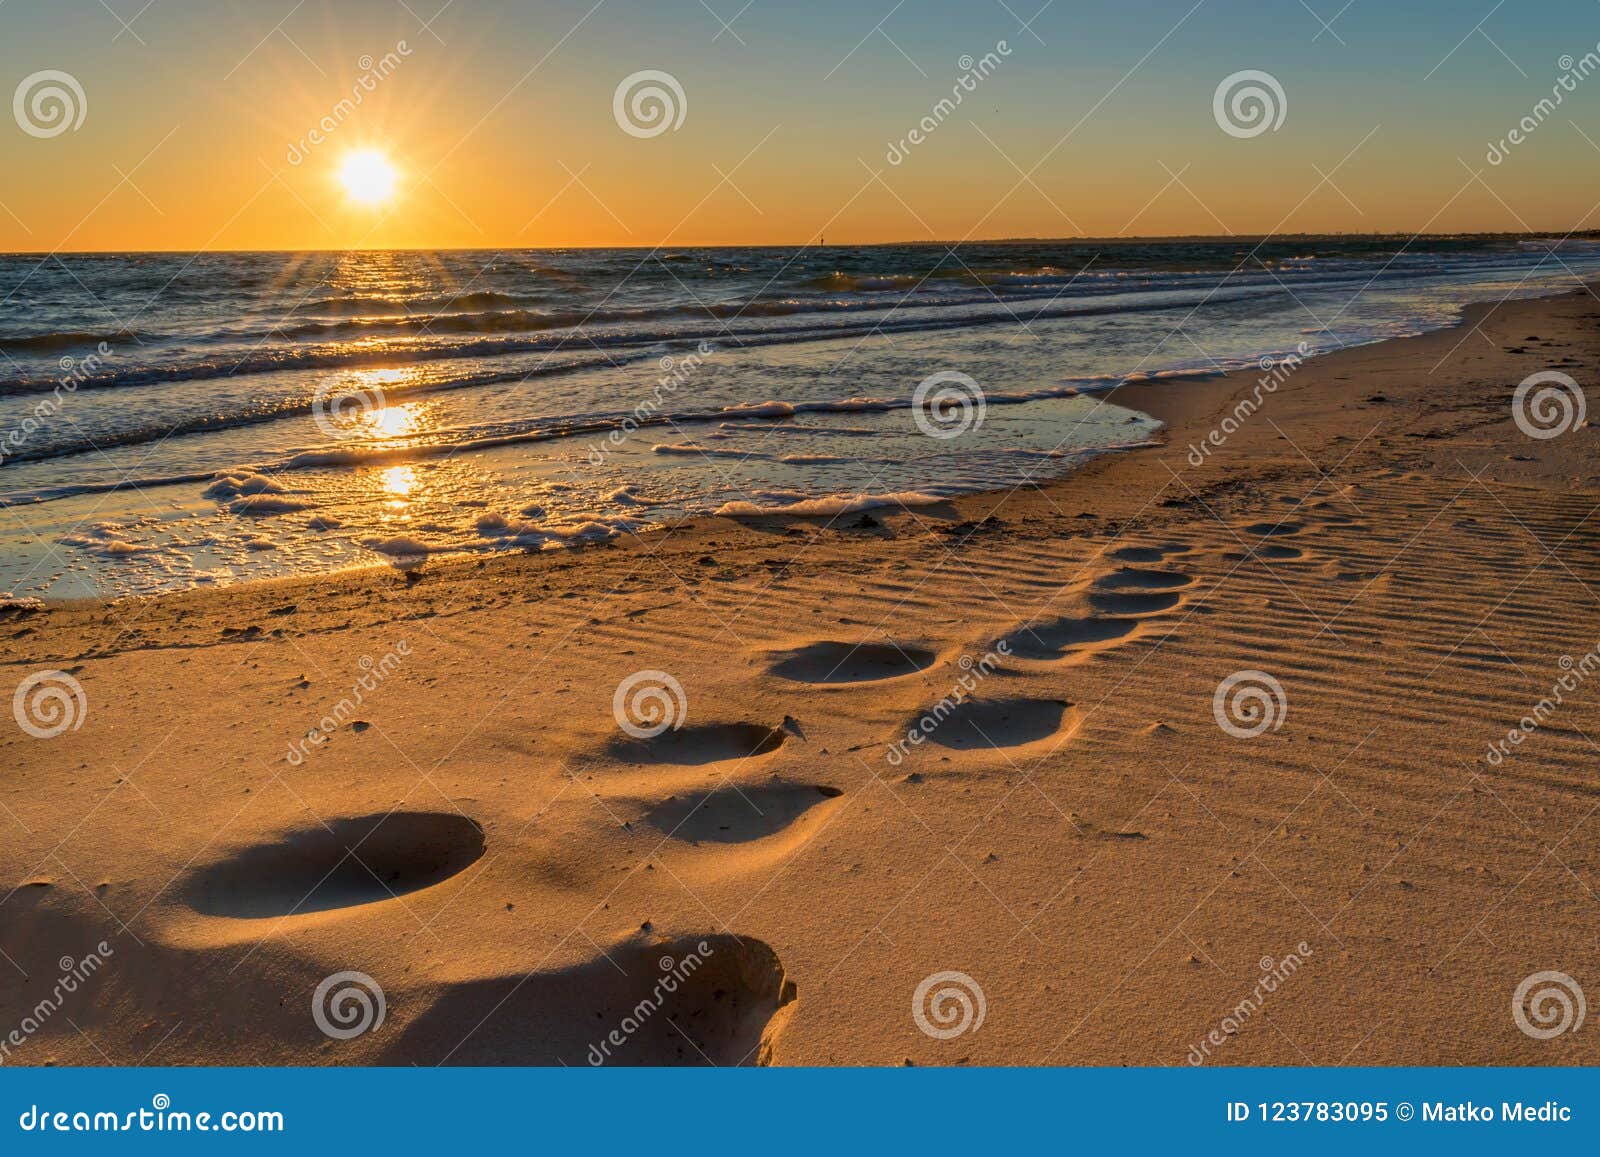 footprints in the sand at sunset